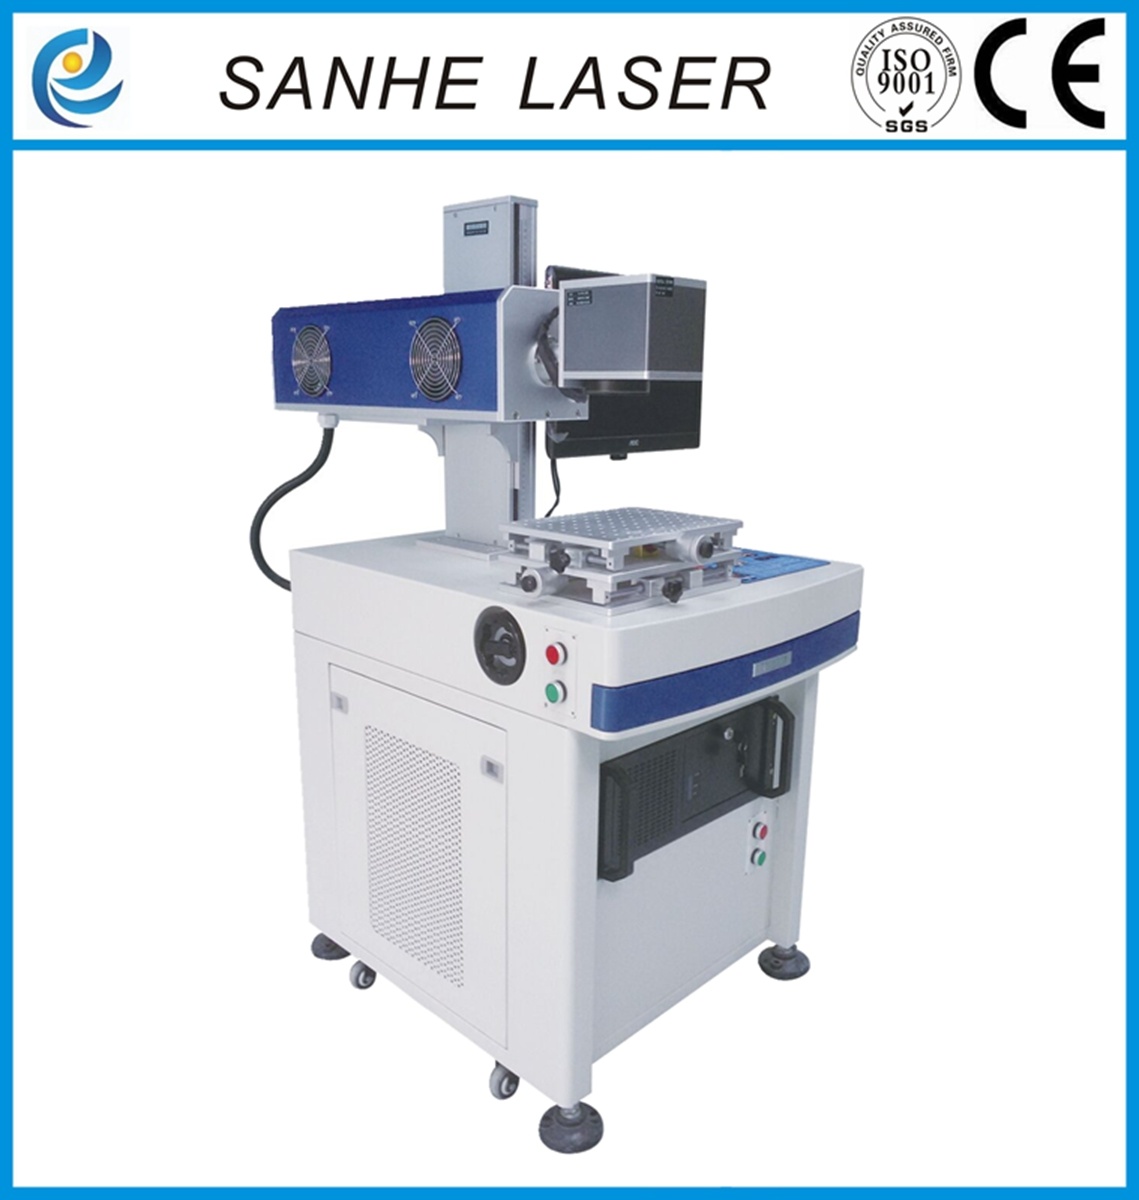 Certification with Ce and ISO CO2 Laser Marking Machine for Non-Metal Product